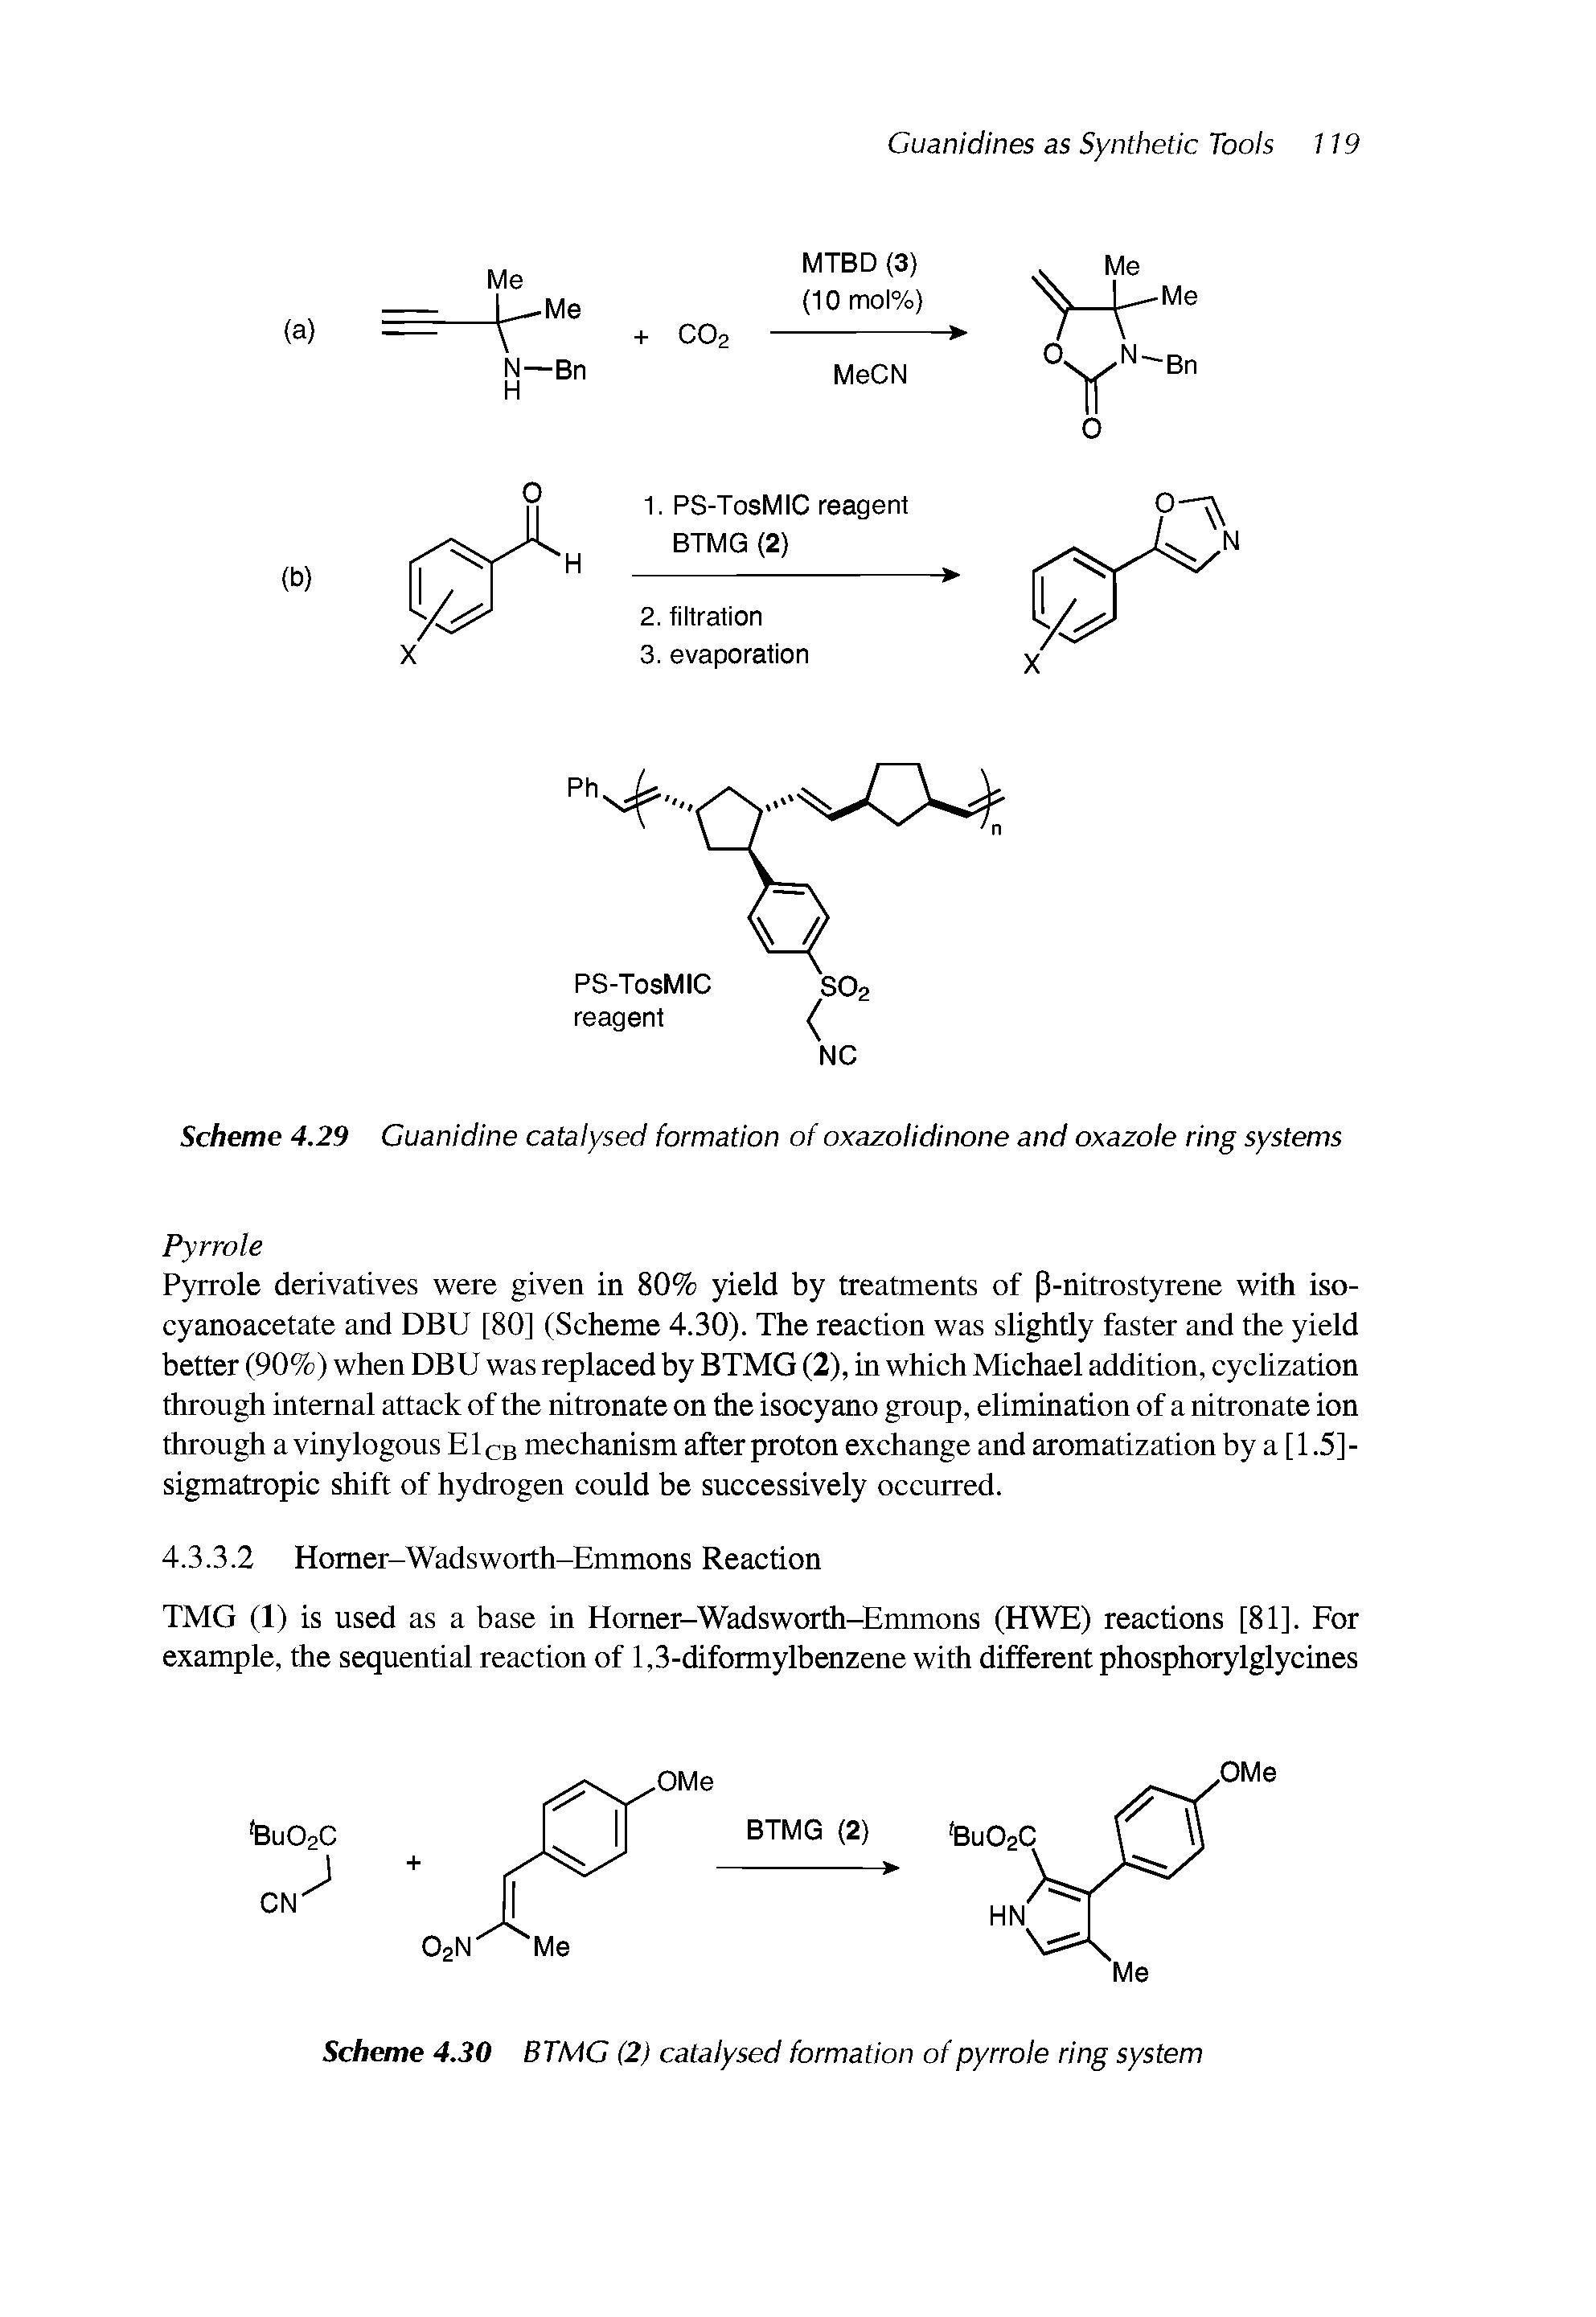 Scheme 4.30 BTMG (2) catalysed formation of pyrrole ring system...